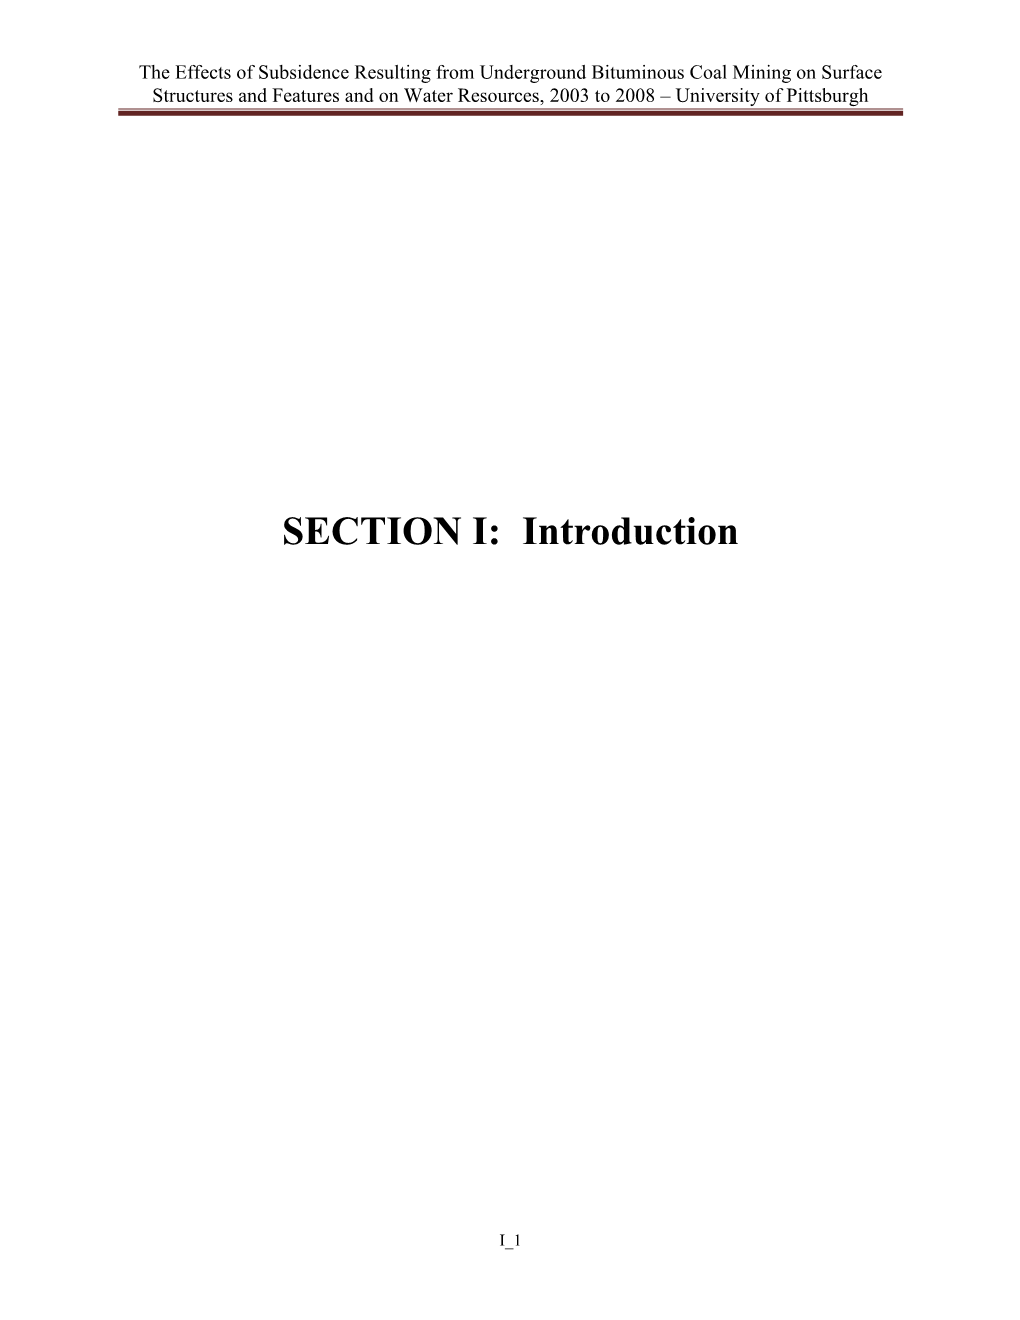 SECTION I: Introduction